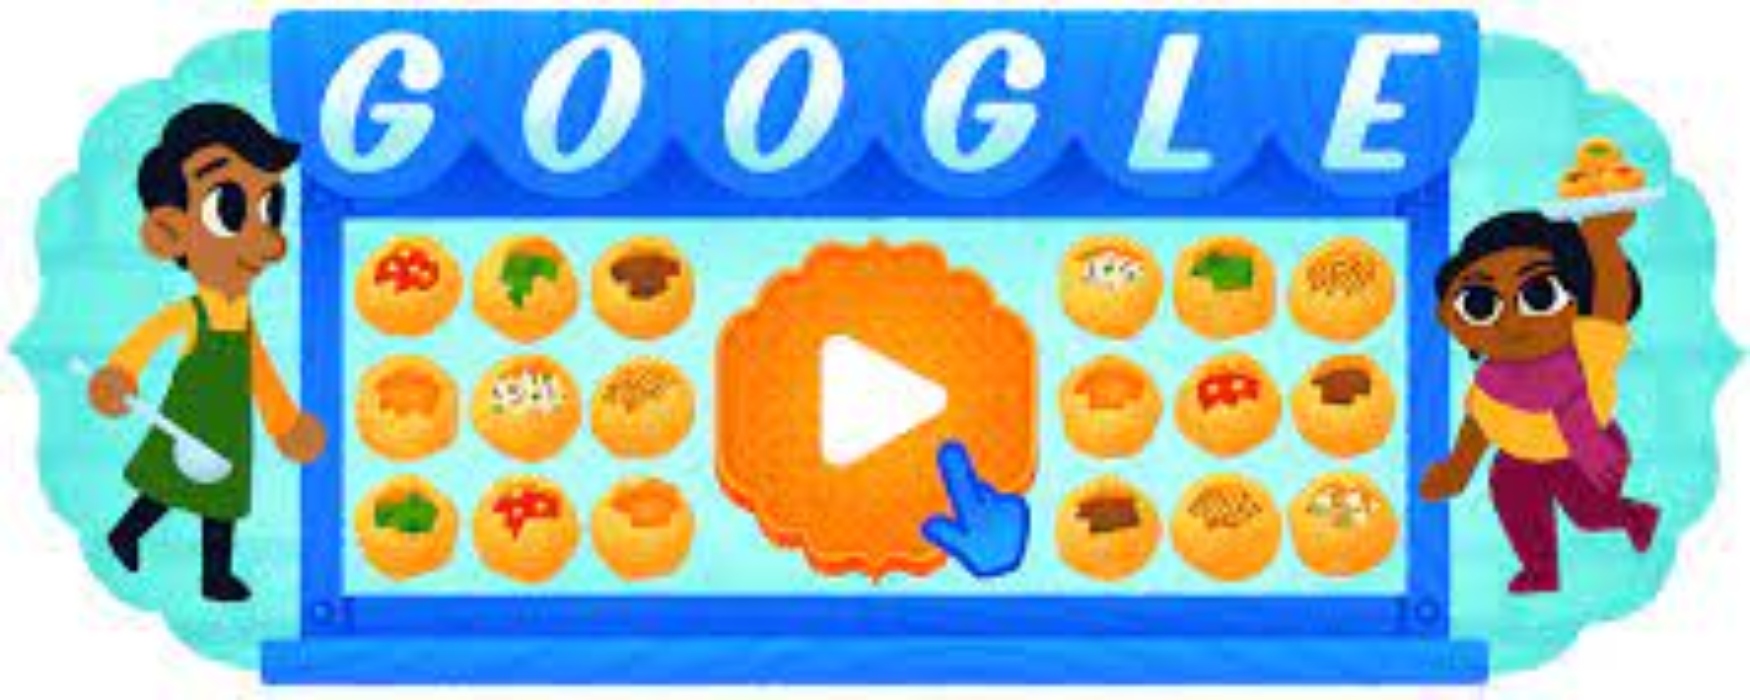 Google Doodle features ‘paani puri’, the famous Indian street food… know why